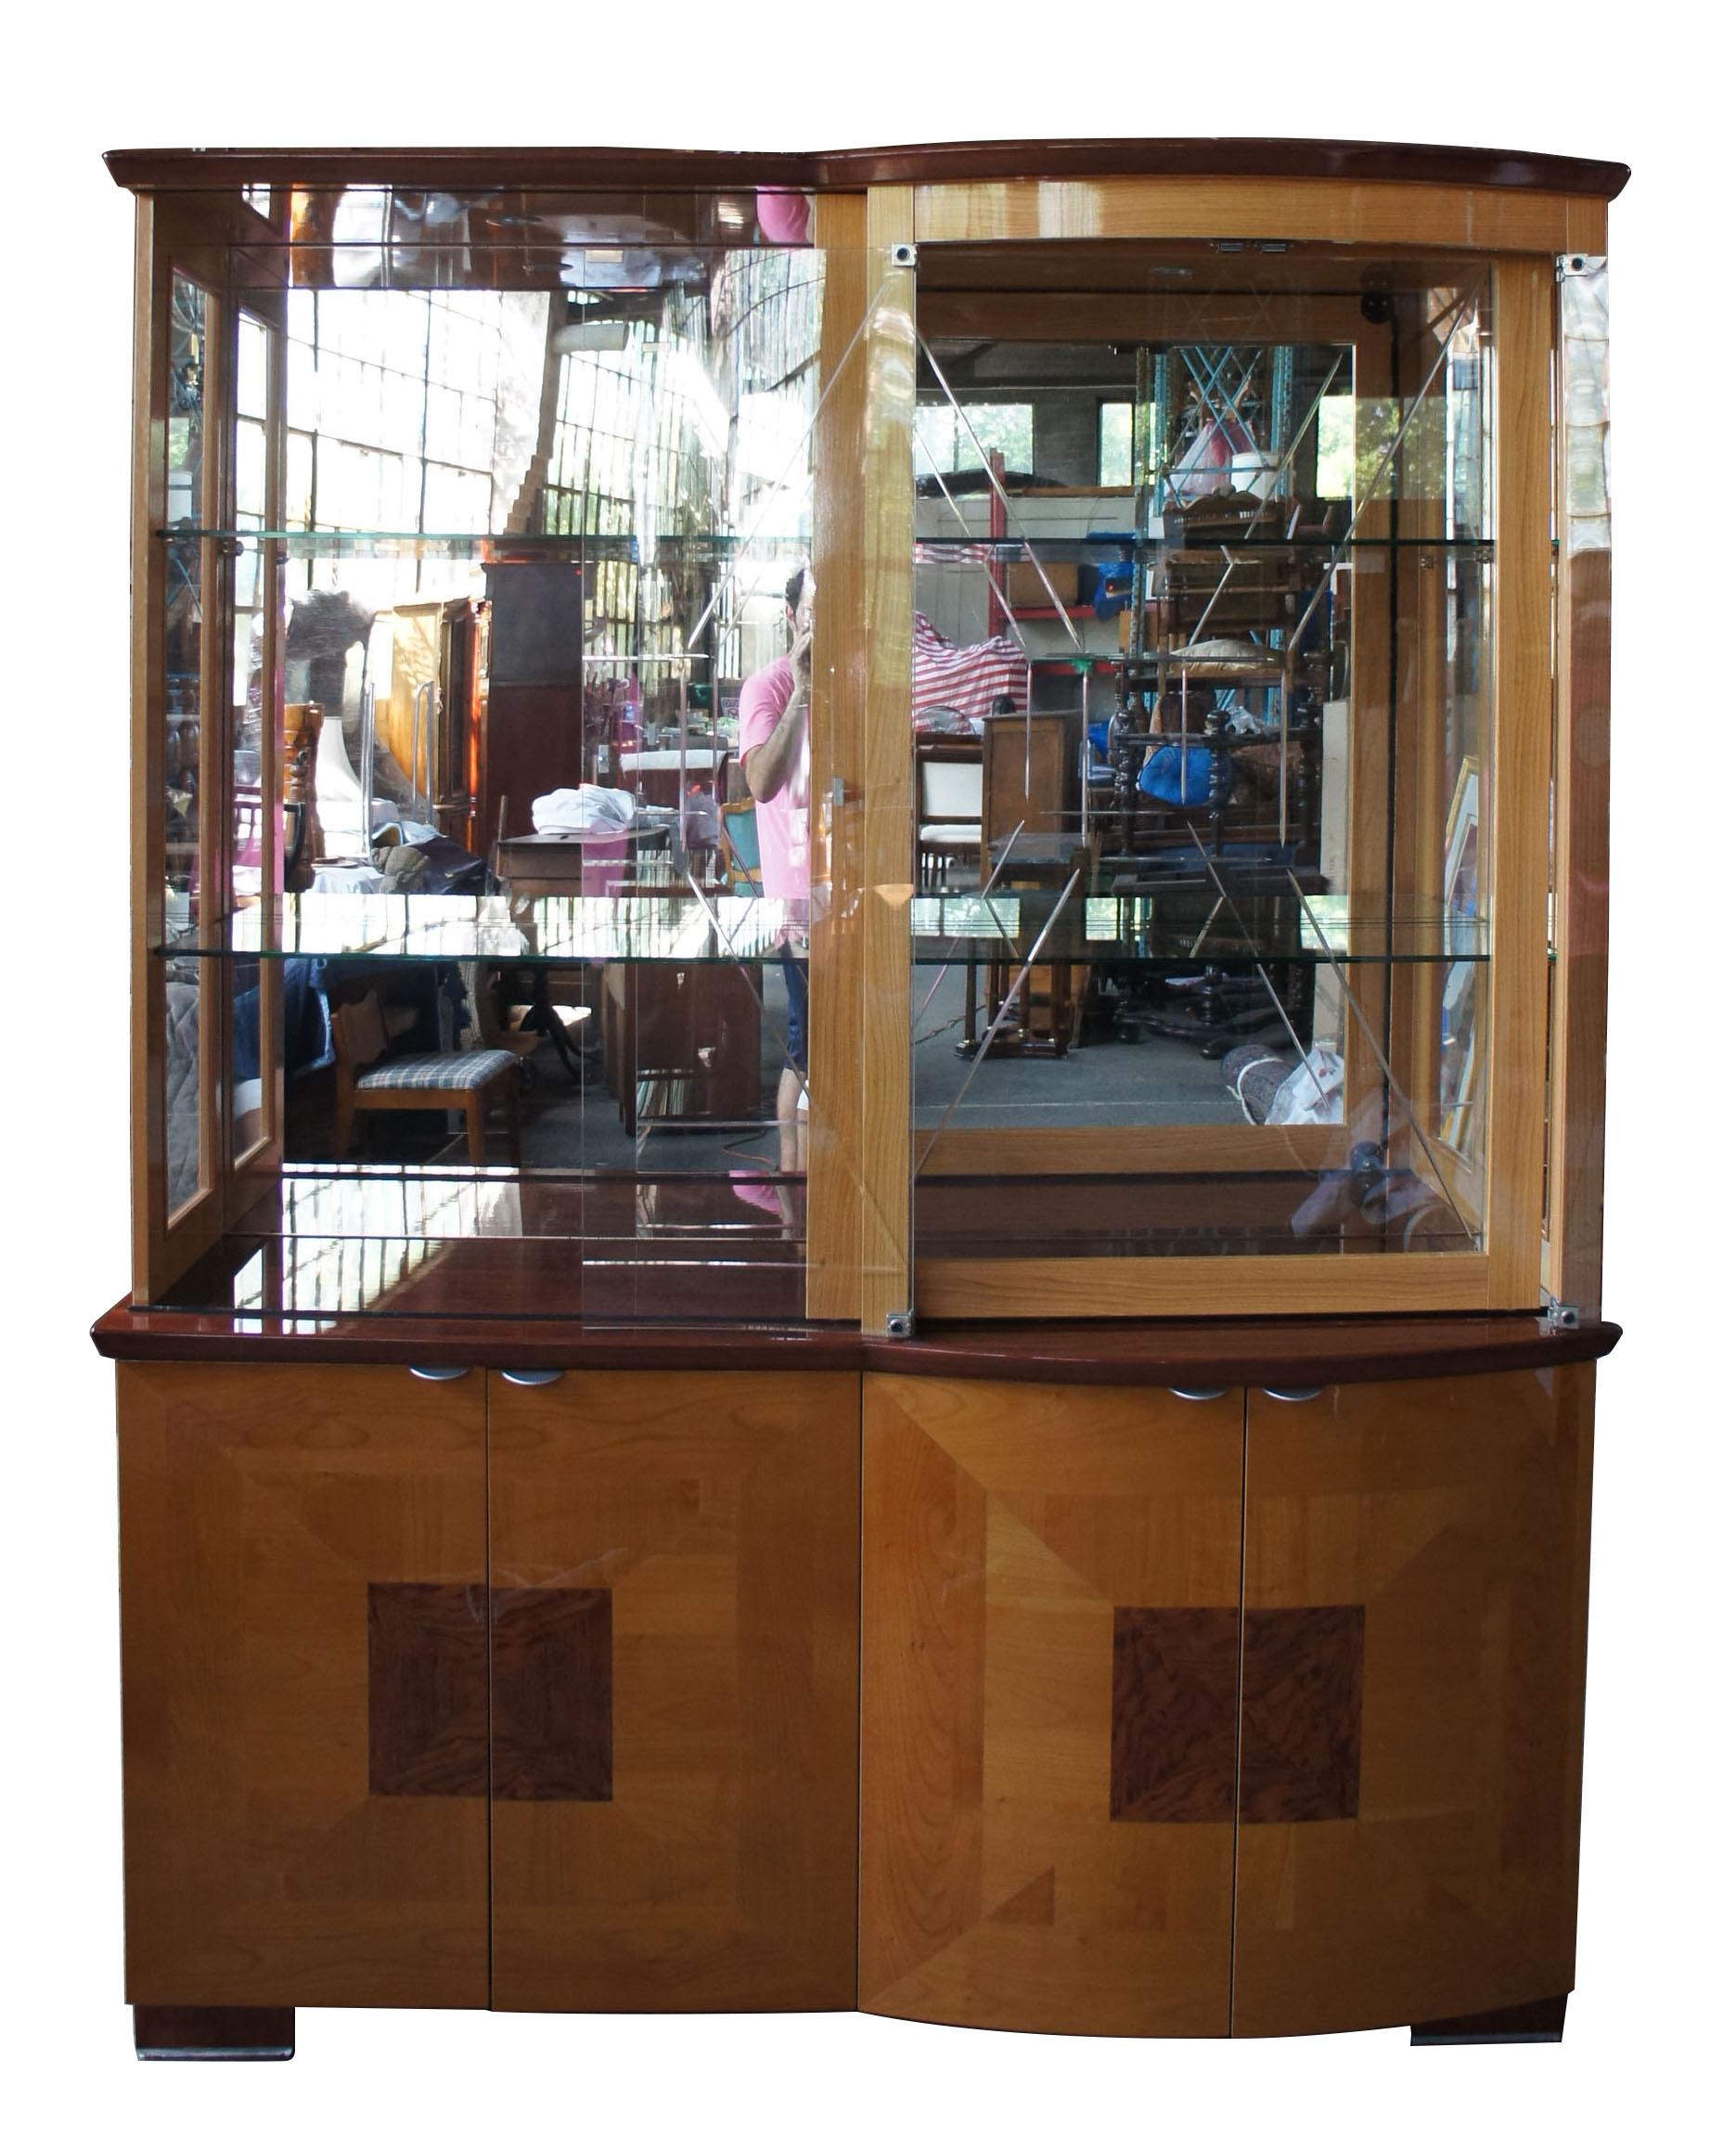 Alf Uno Italian modern walnut china hutch illuminated curio cabinet vitrine MCM

A gorgeous cabinet that can be used for display in any setting. Made from maple and walnut with a lacquered high-gloss finish. An illuminated top with mirrored